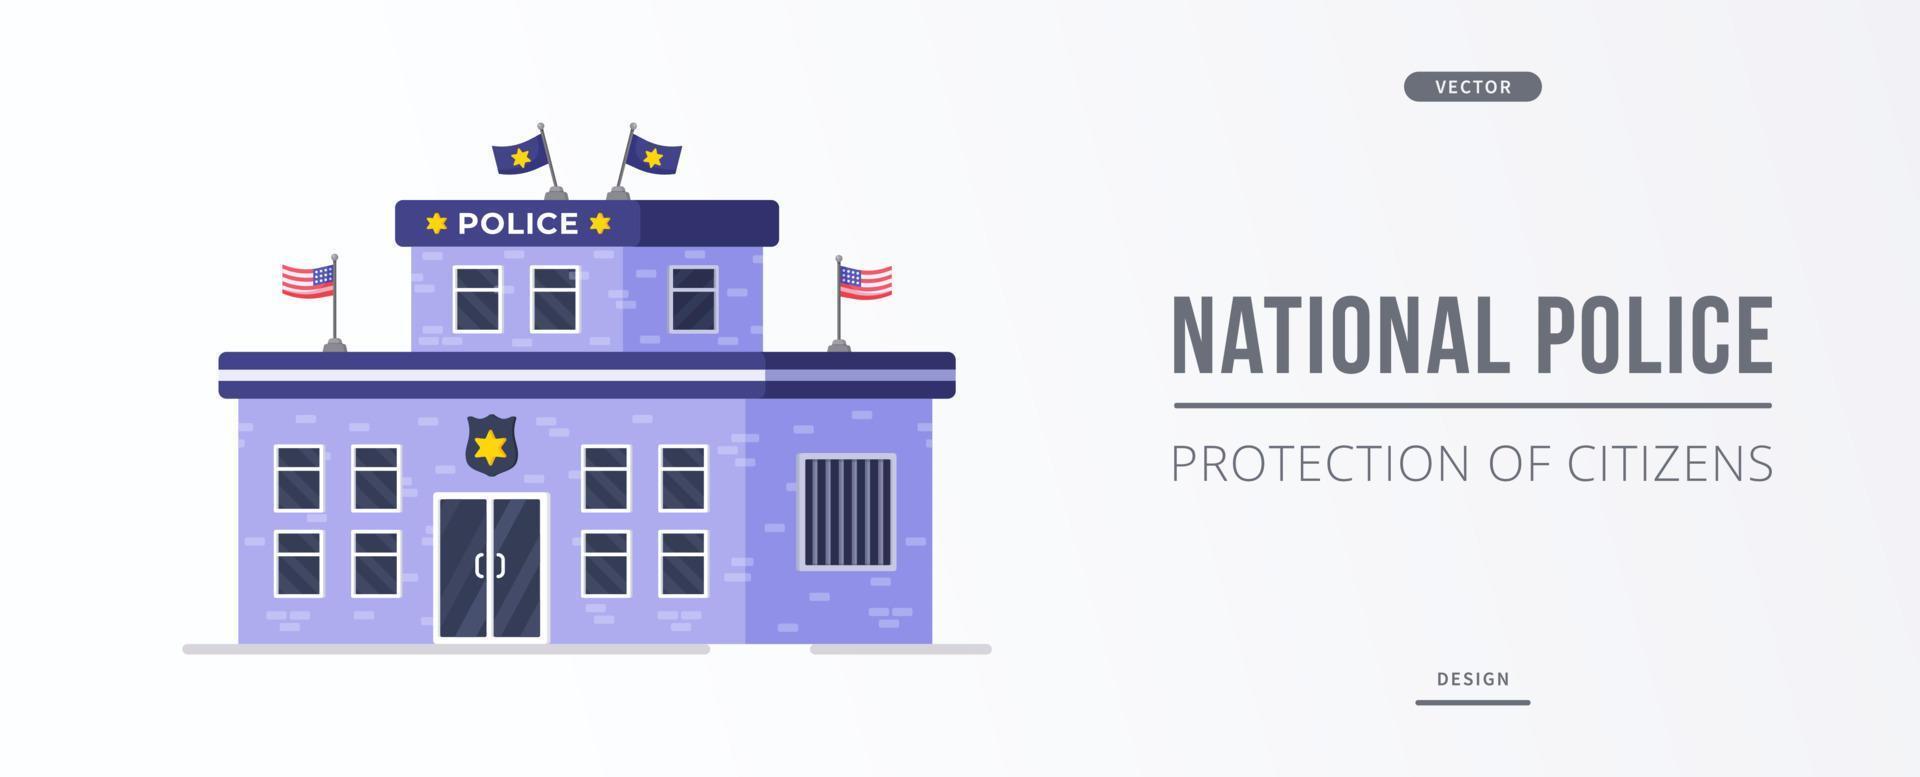 Vector illustration of the police department. In honor of the heroic policeman.